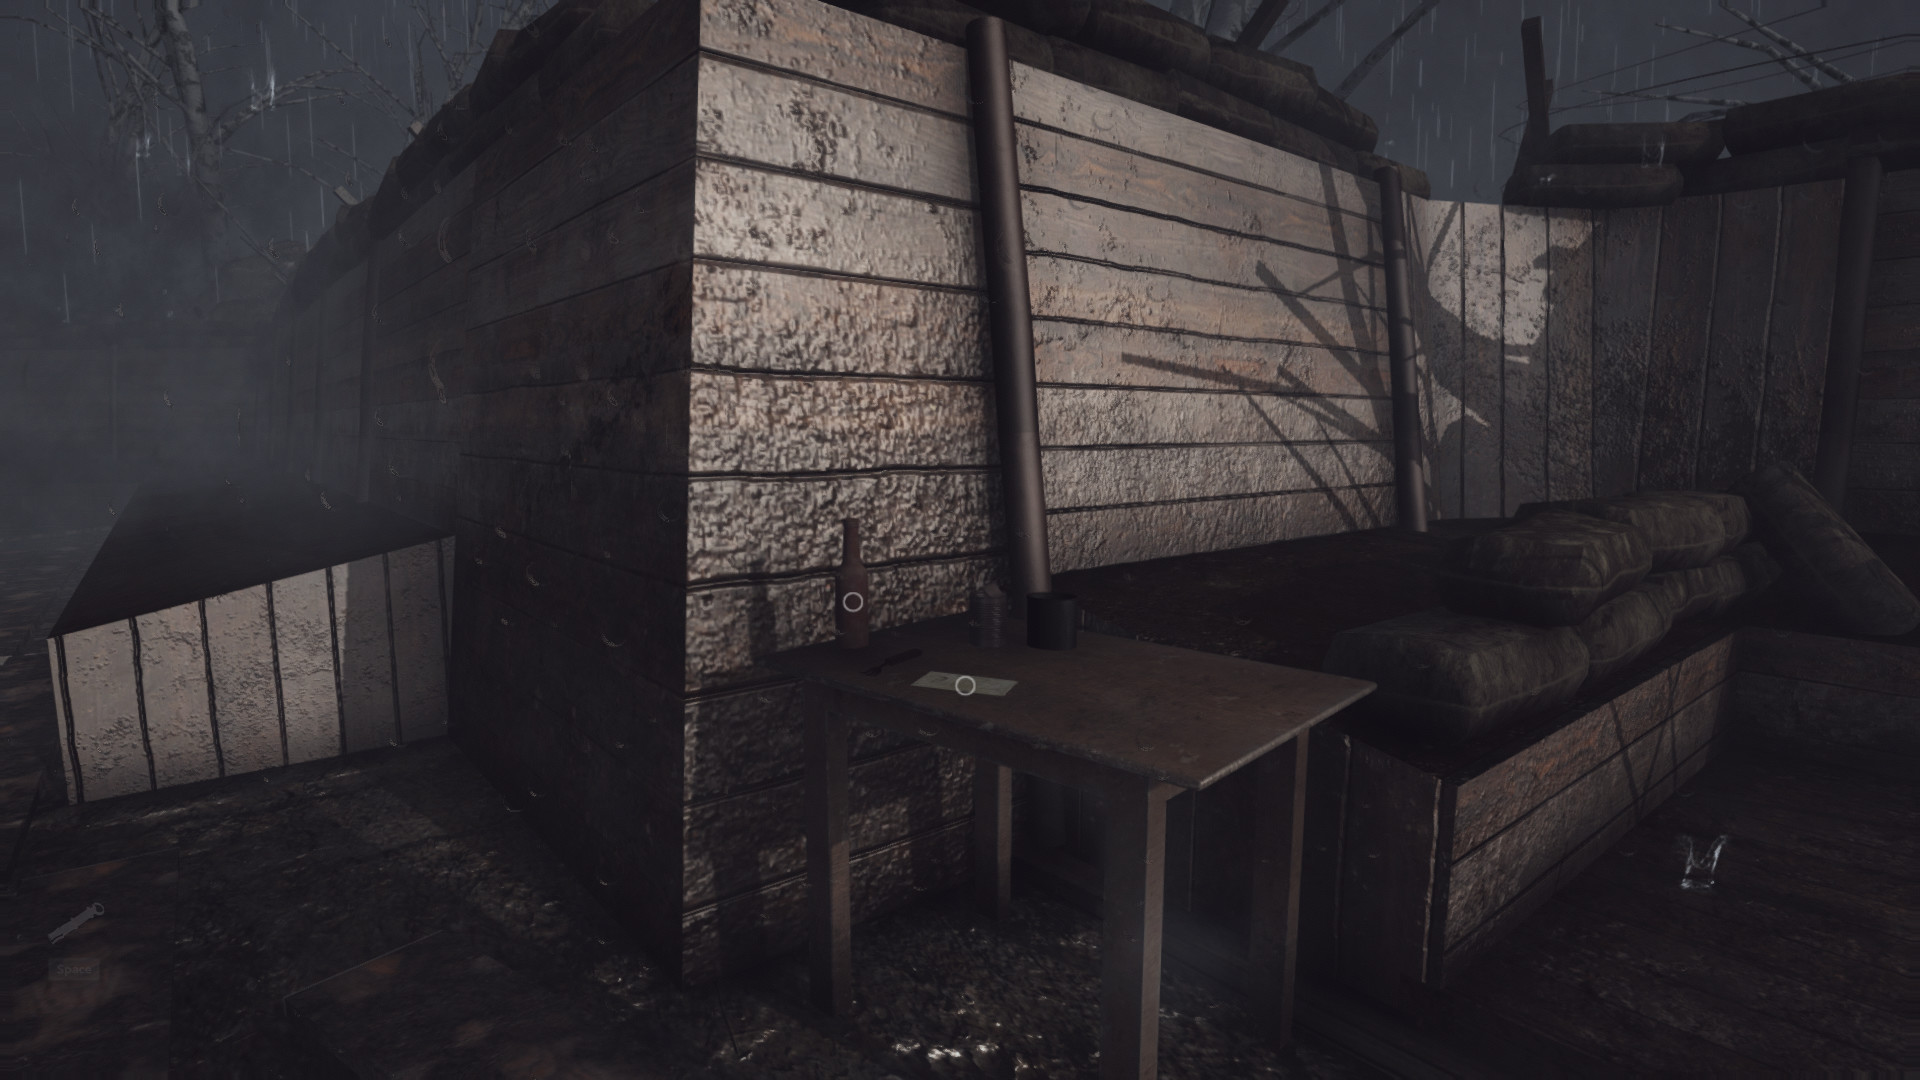 Save 20% on Trenches War 1 Horror Survival Game on Steam